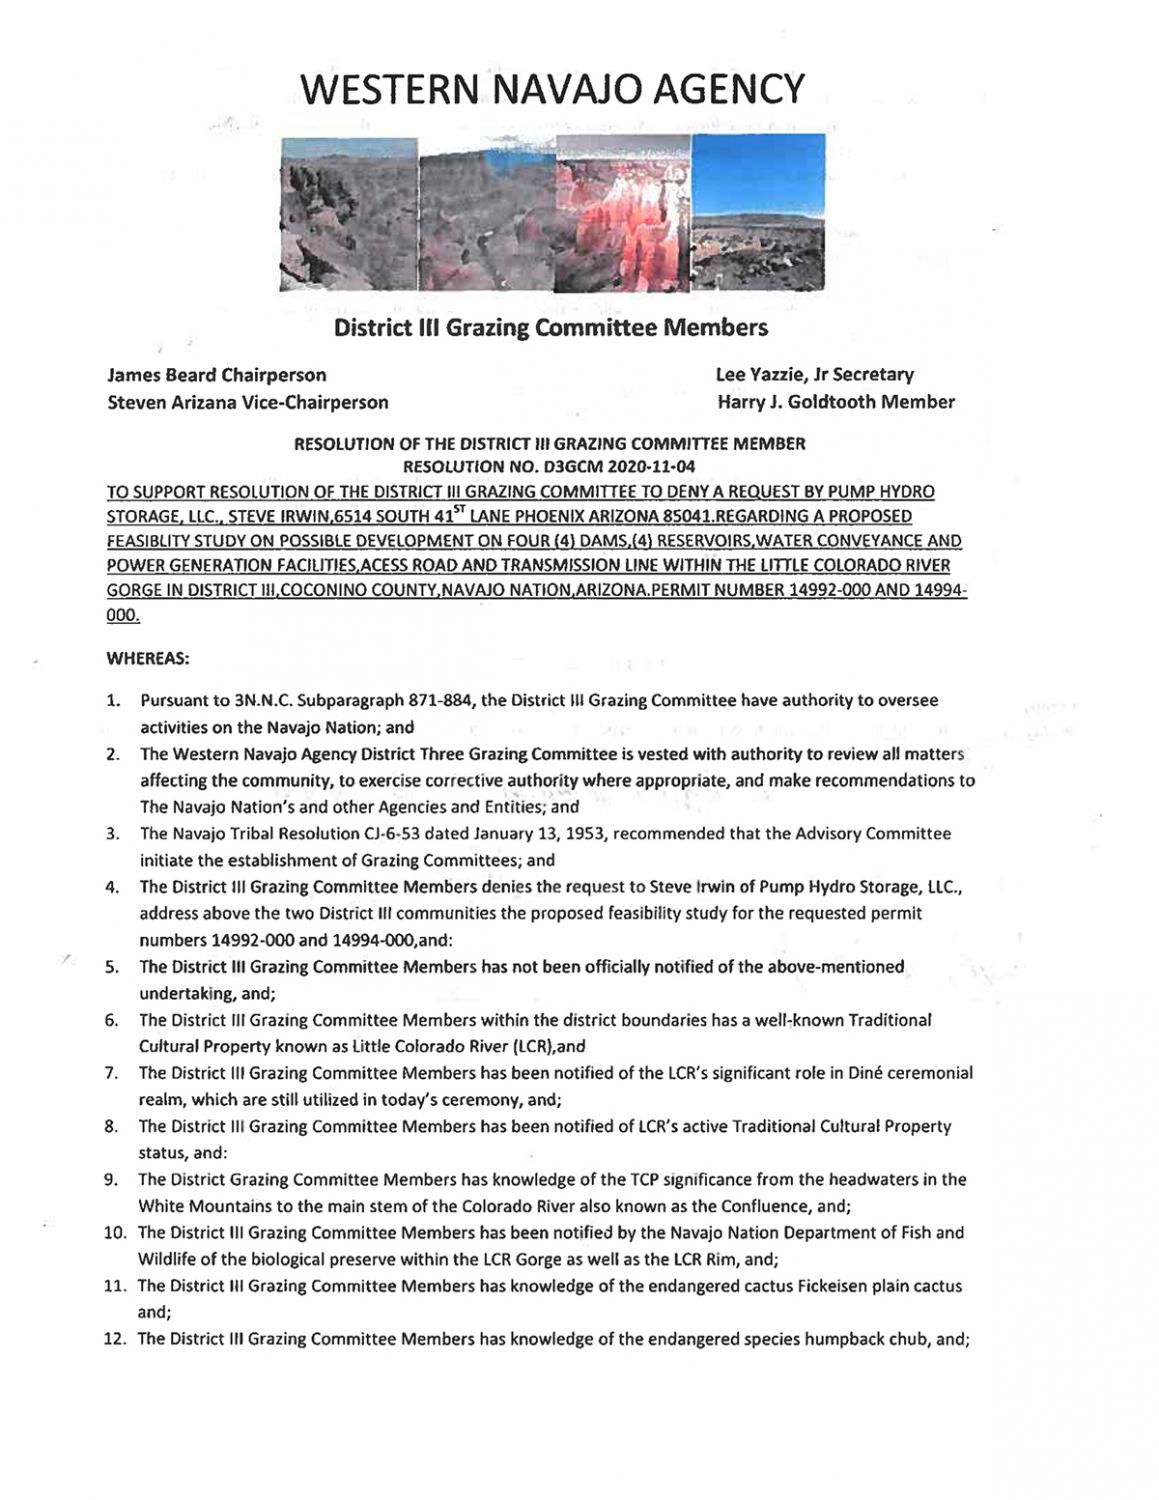 District III resolution against pumped hydro storage projects